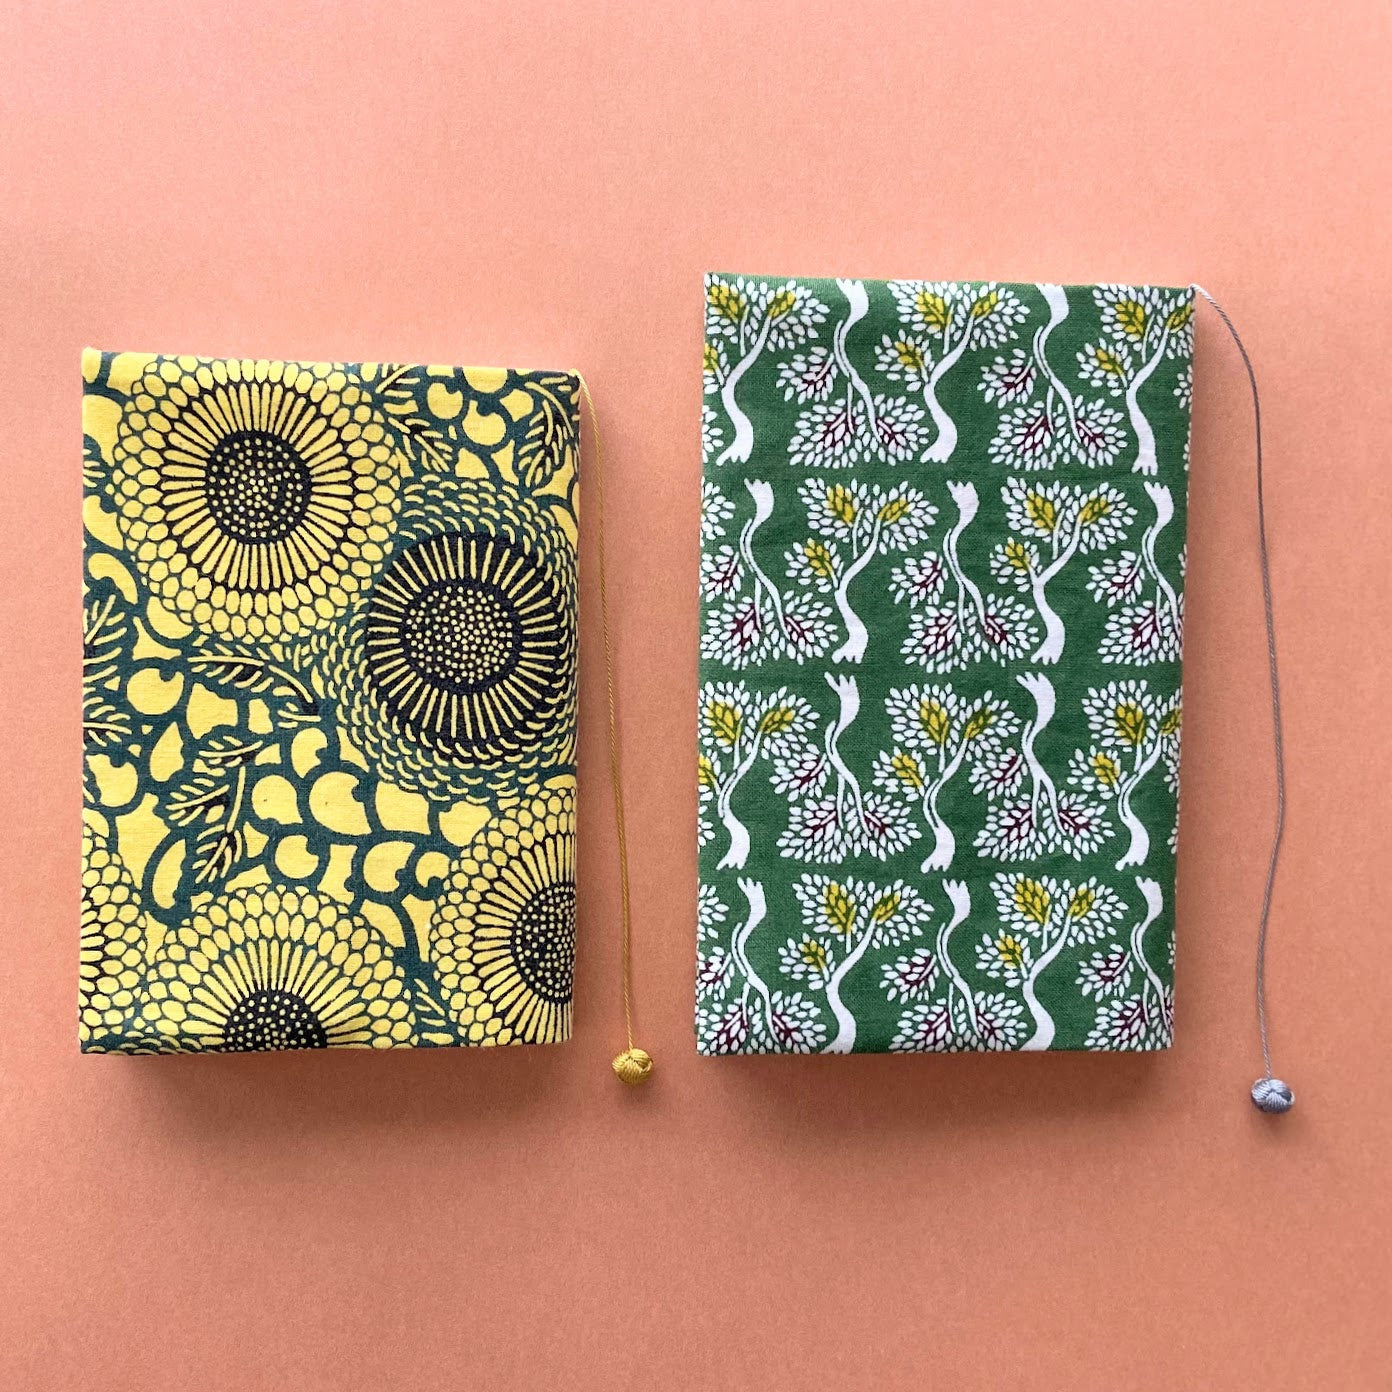 Book cover paperback size / round pattern